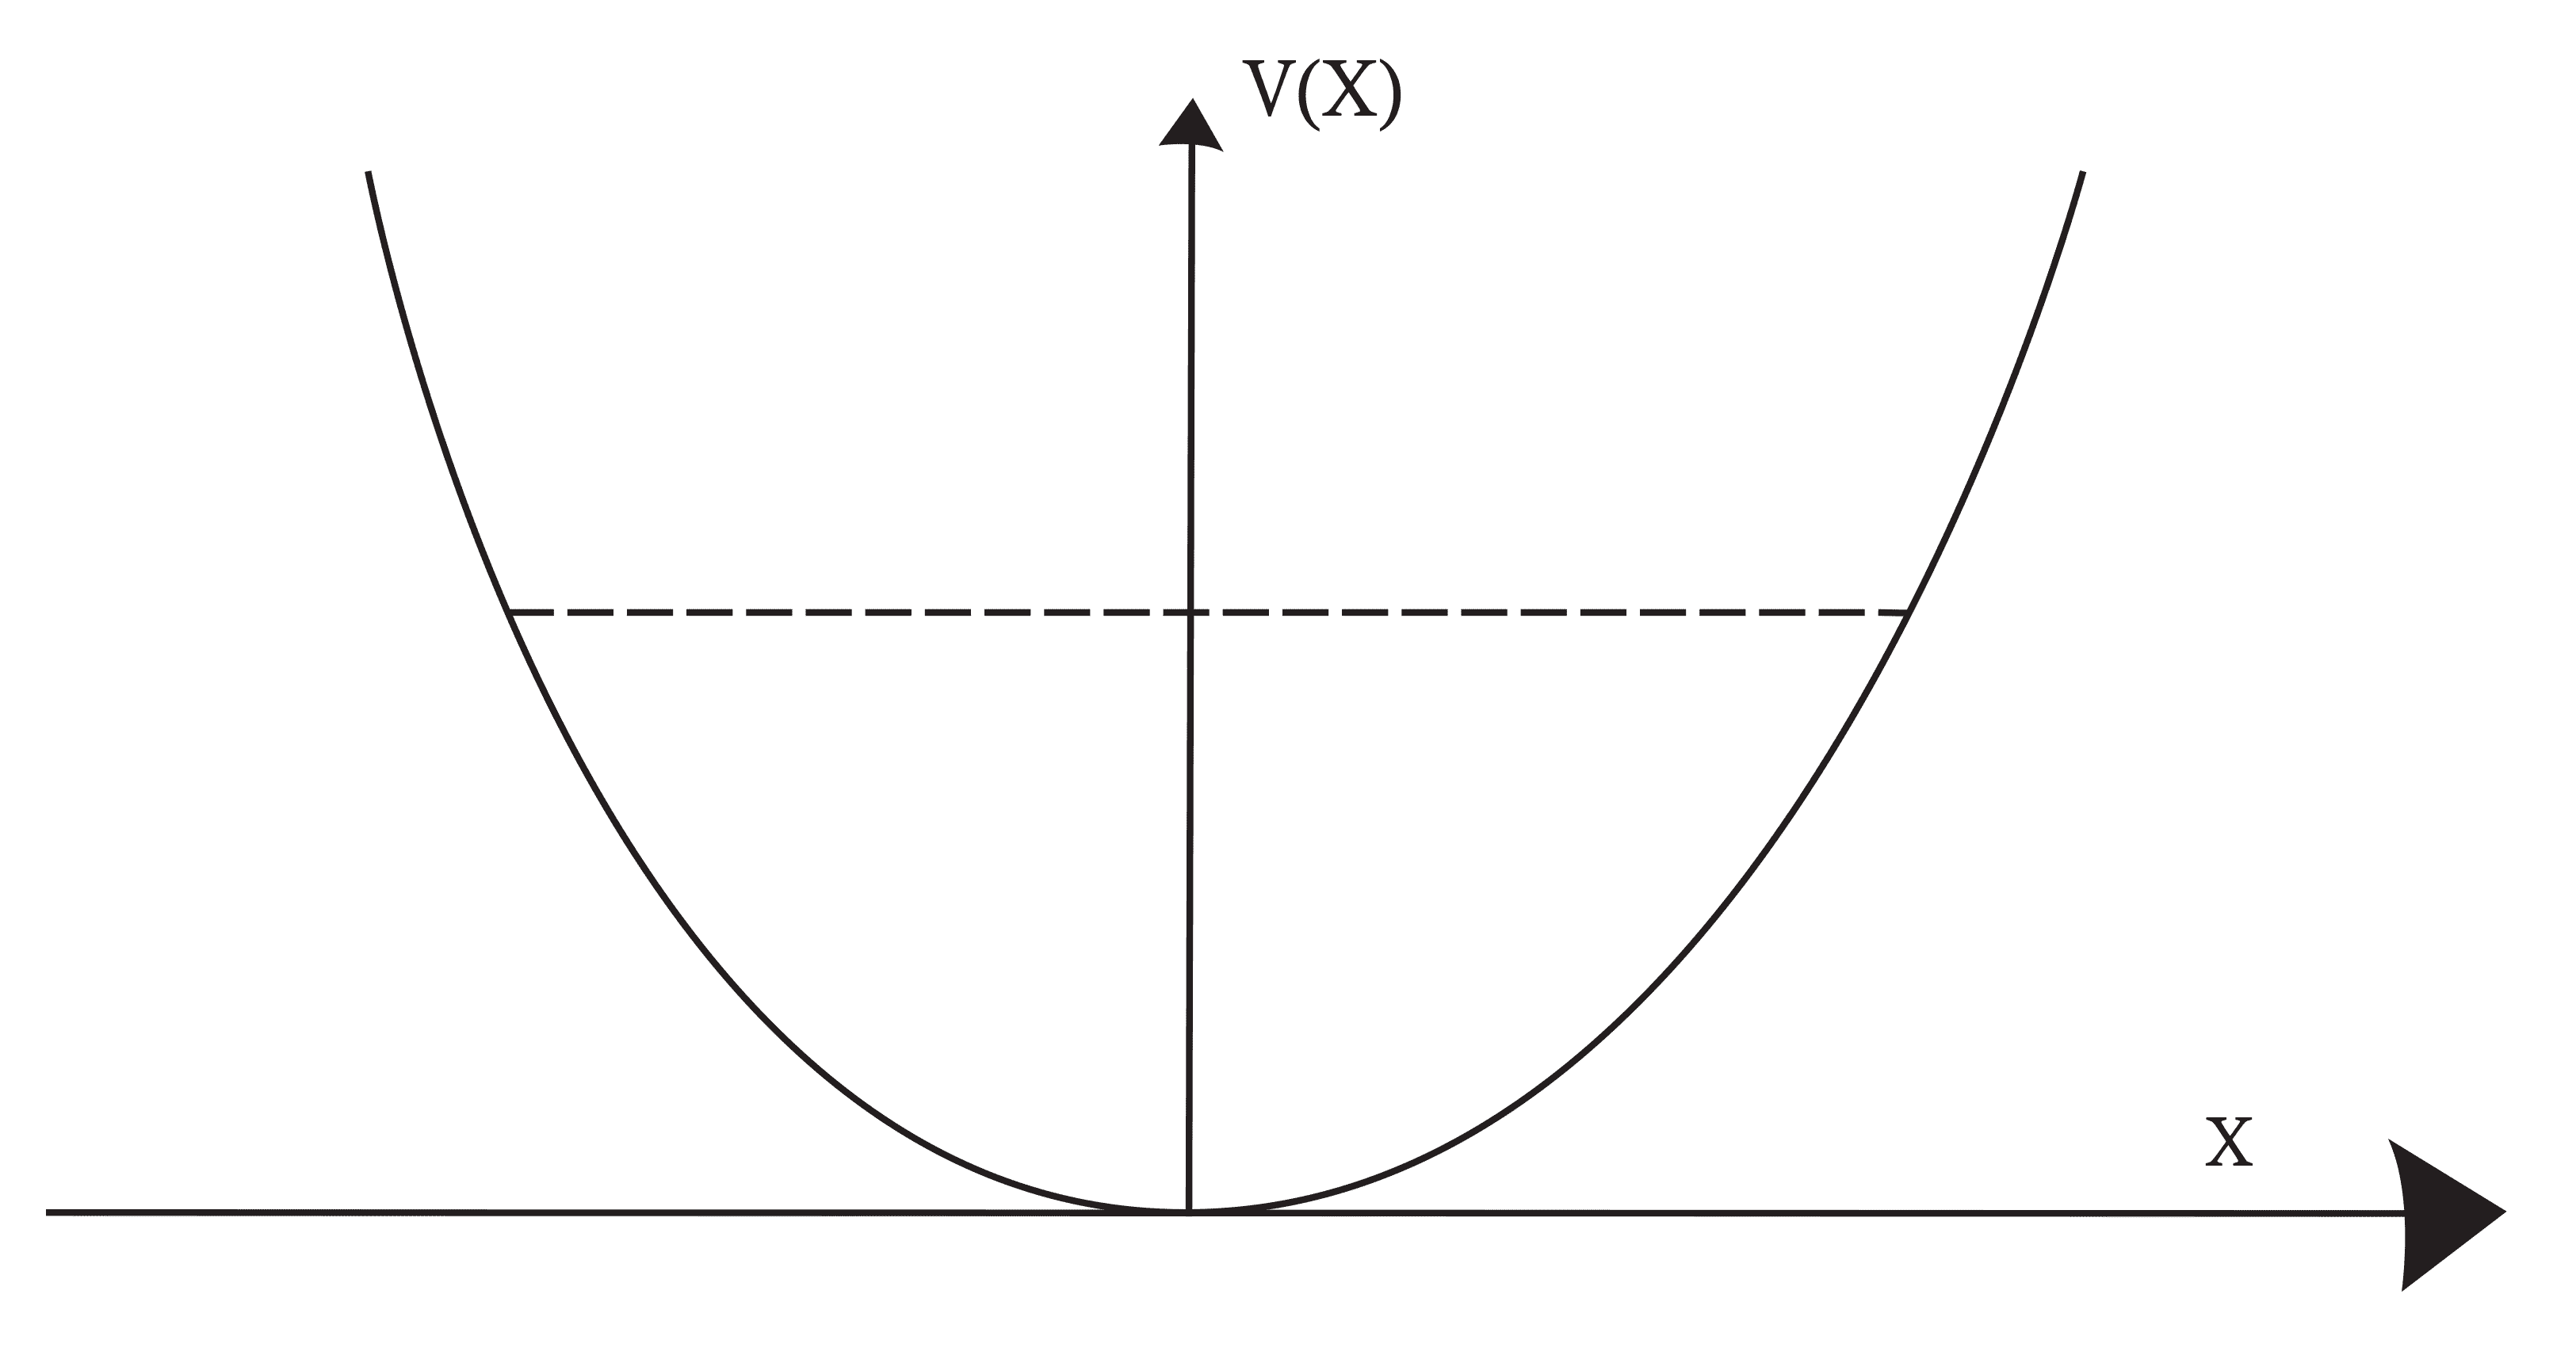 Graph of potential energy w.r.t x